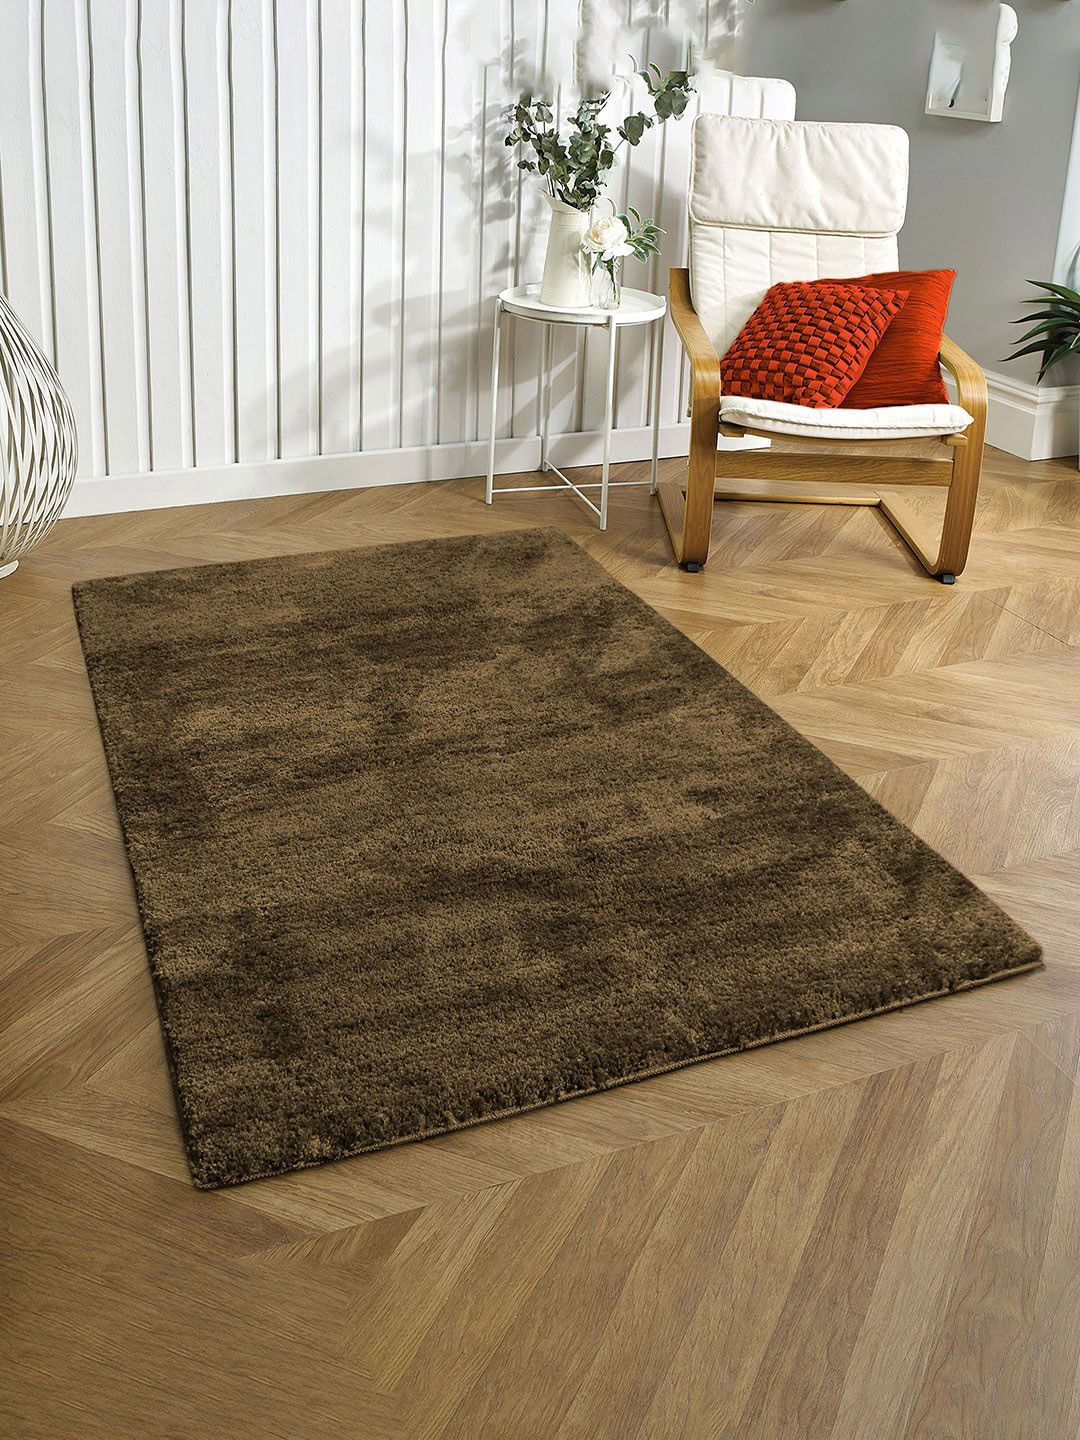 LUXEHOME INTERNATIONAL Coffee-Brown Solid Rectangular Anti-Skid Carpet Price in India